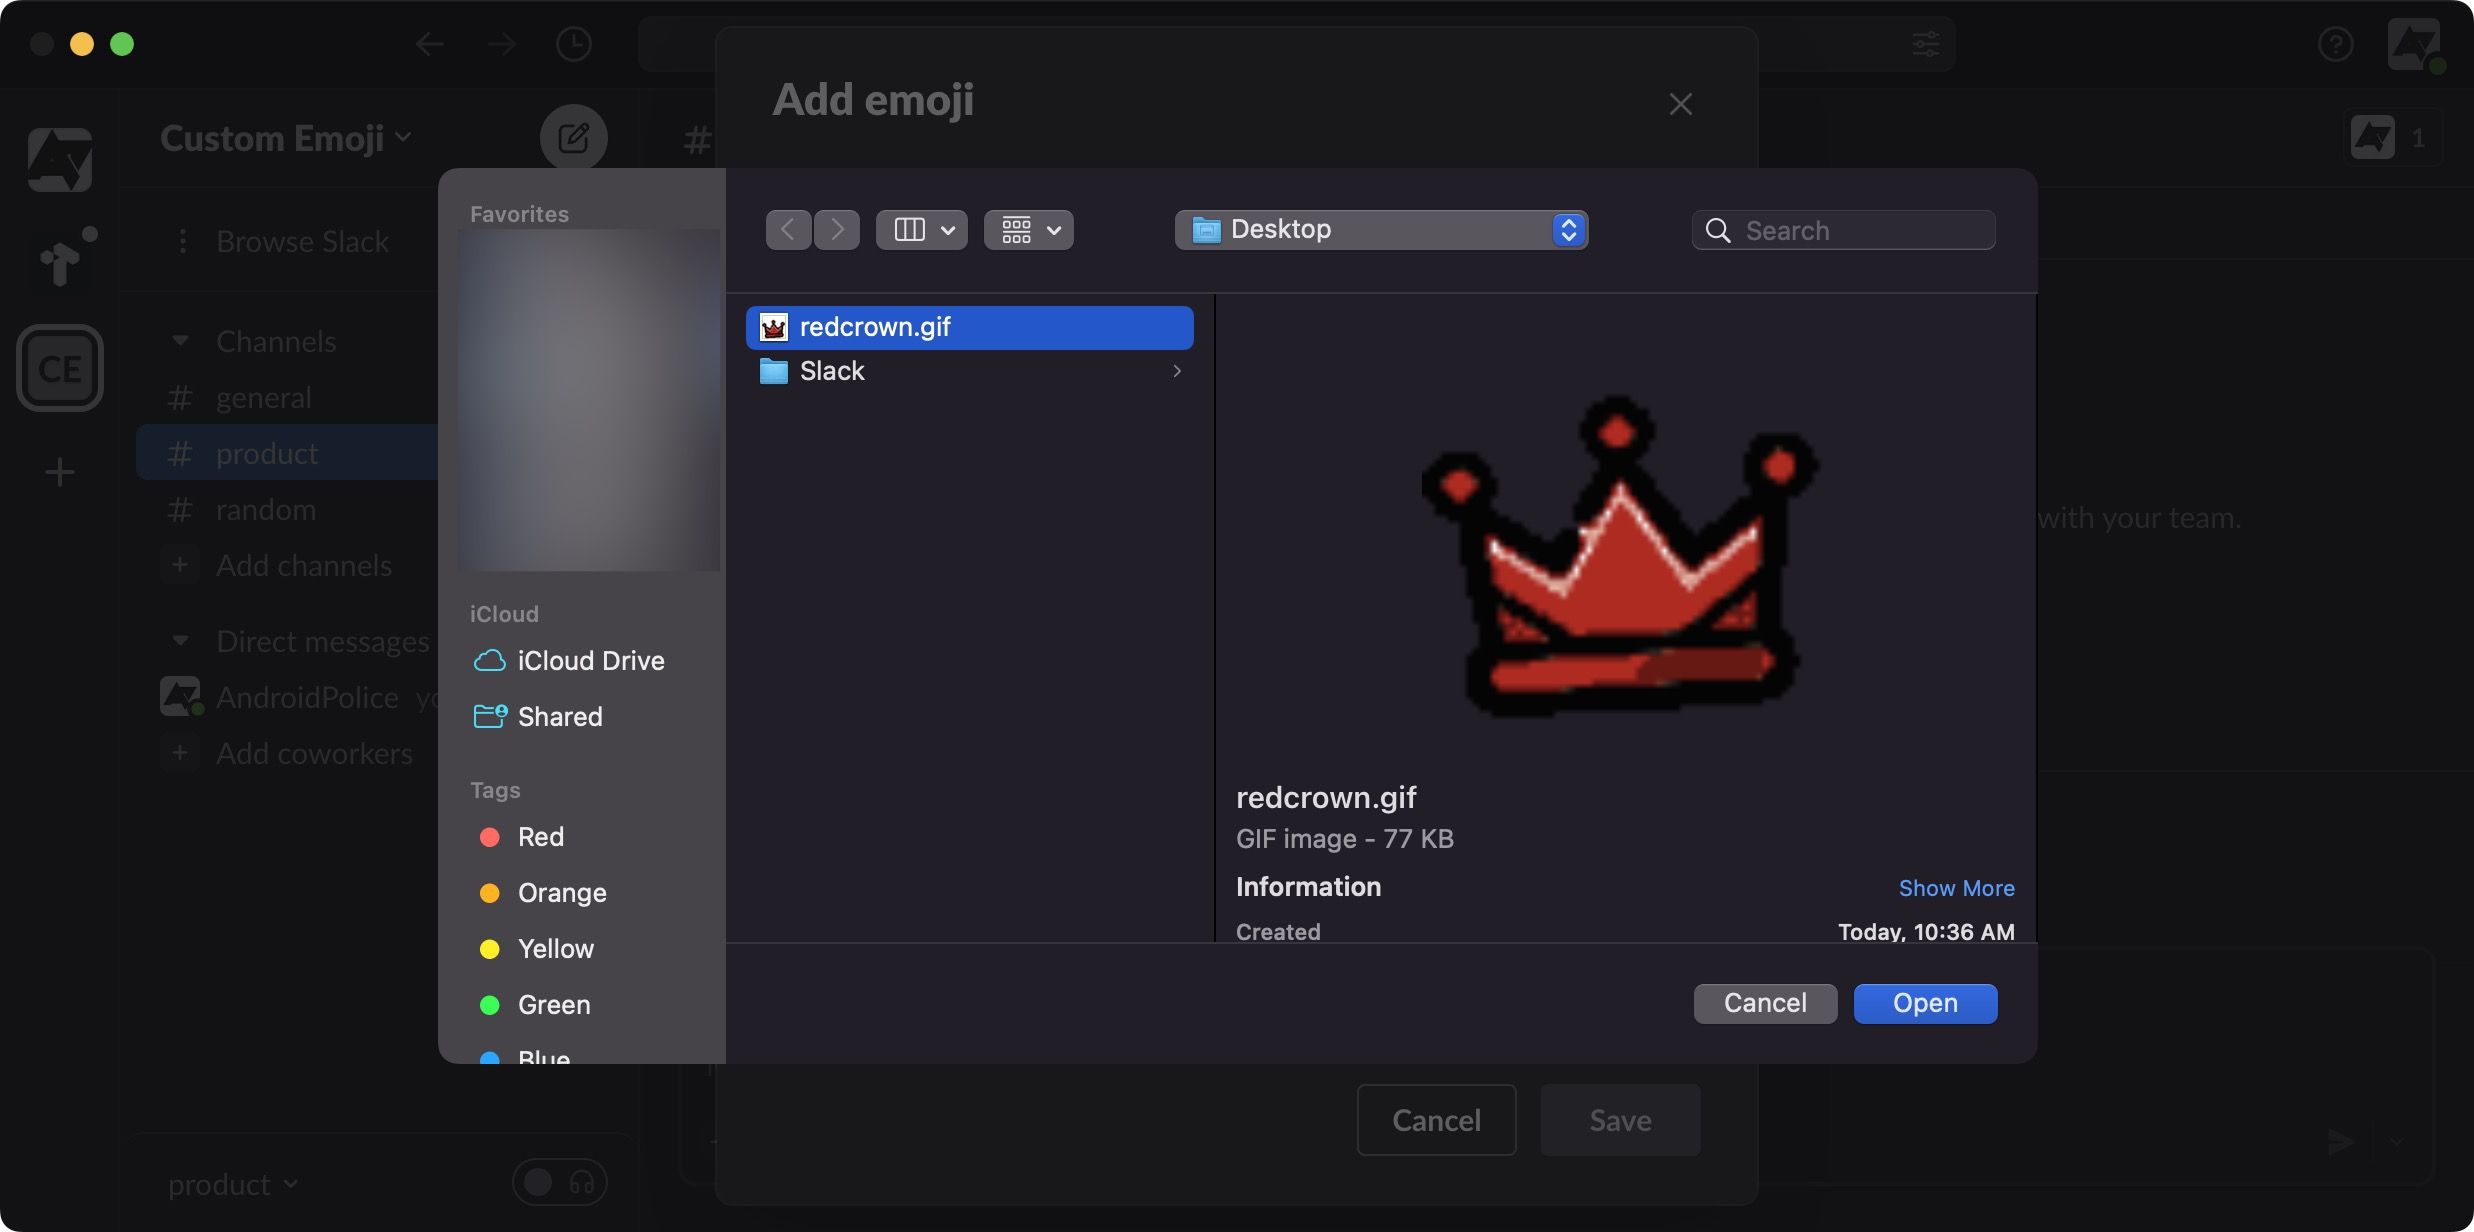 A file finder window from the Mac ecosystem, displaying a variety of files. Among these, a red crown GIF is highlighted, indicating it has been selected for uploading as a custom emoji.